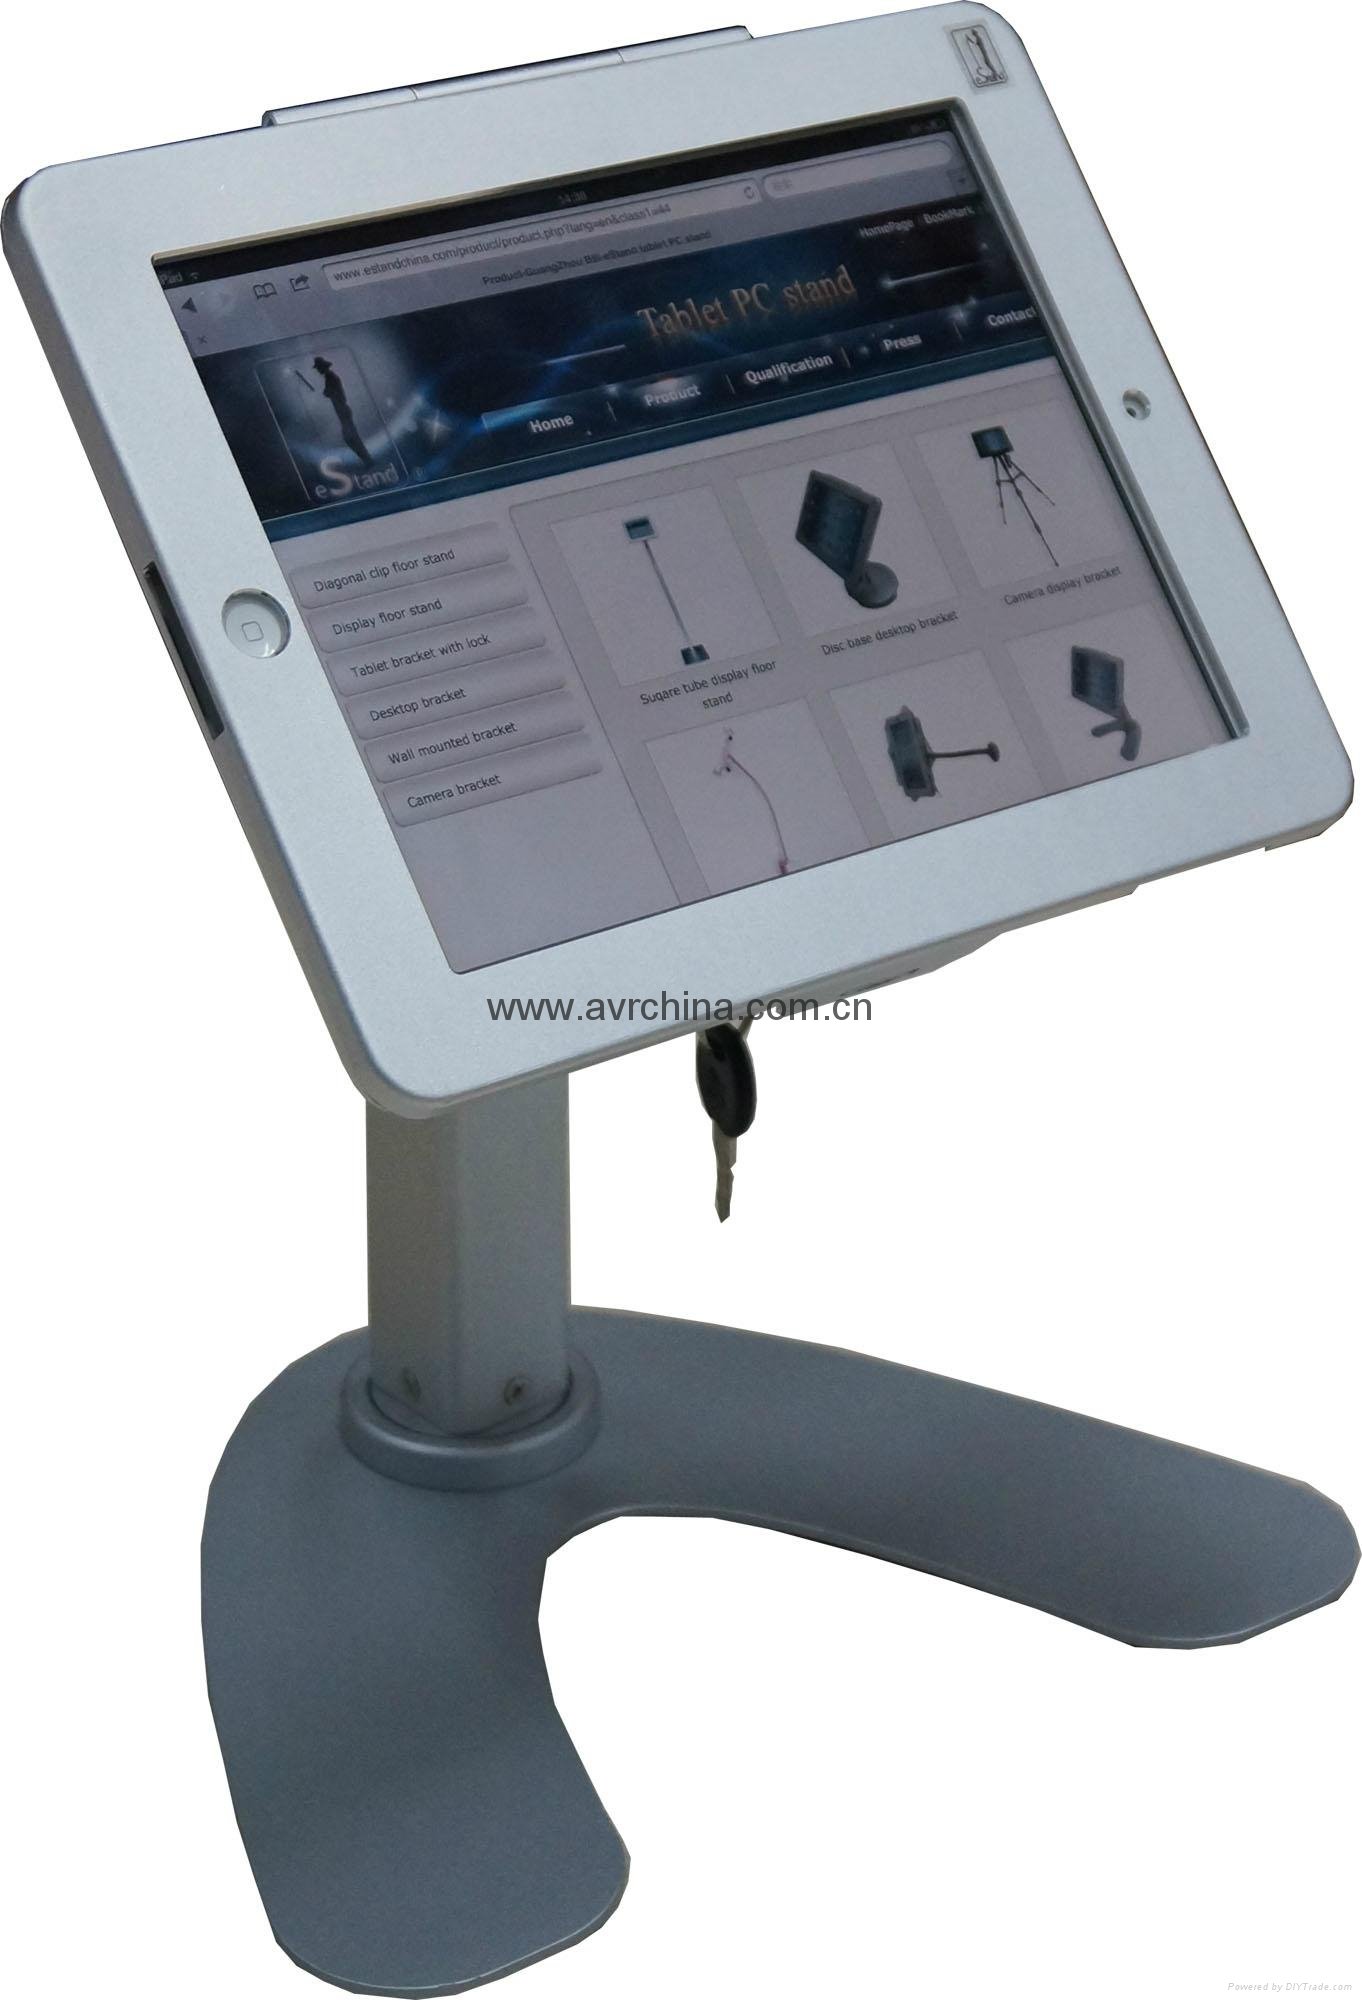 Table tablet for Ipad whatsapp:+65 8498 4312